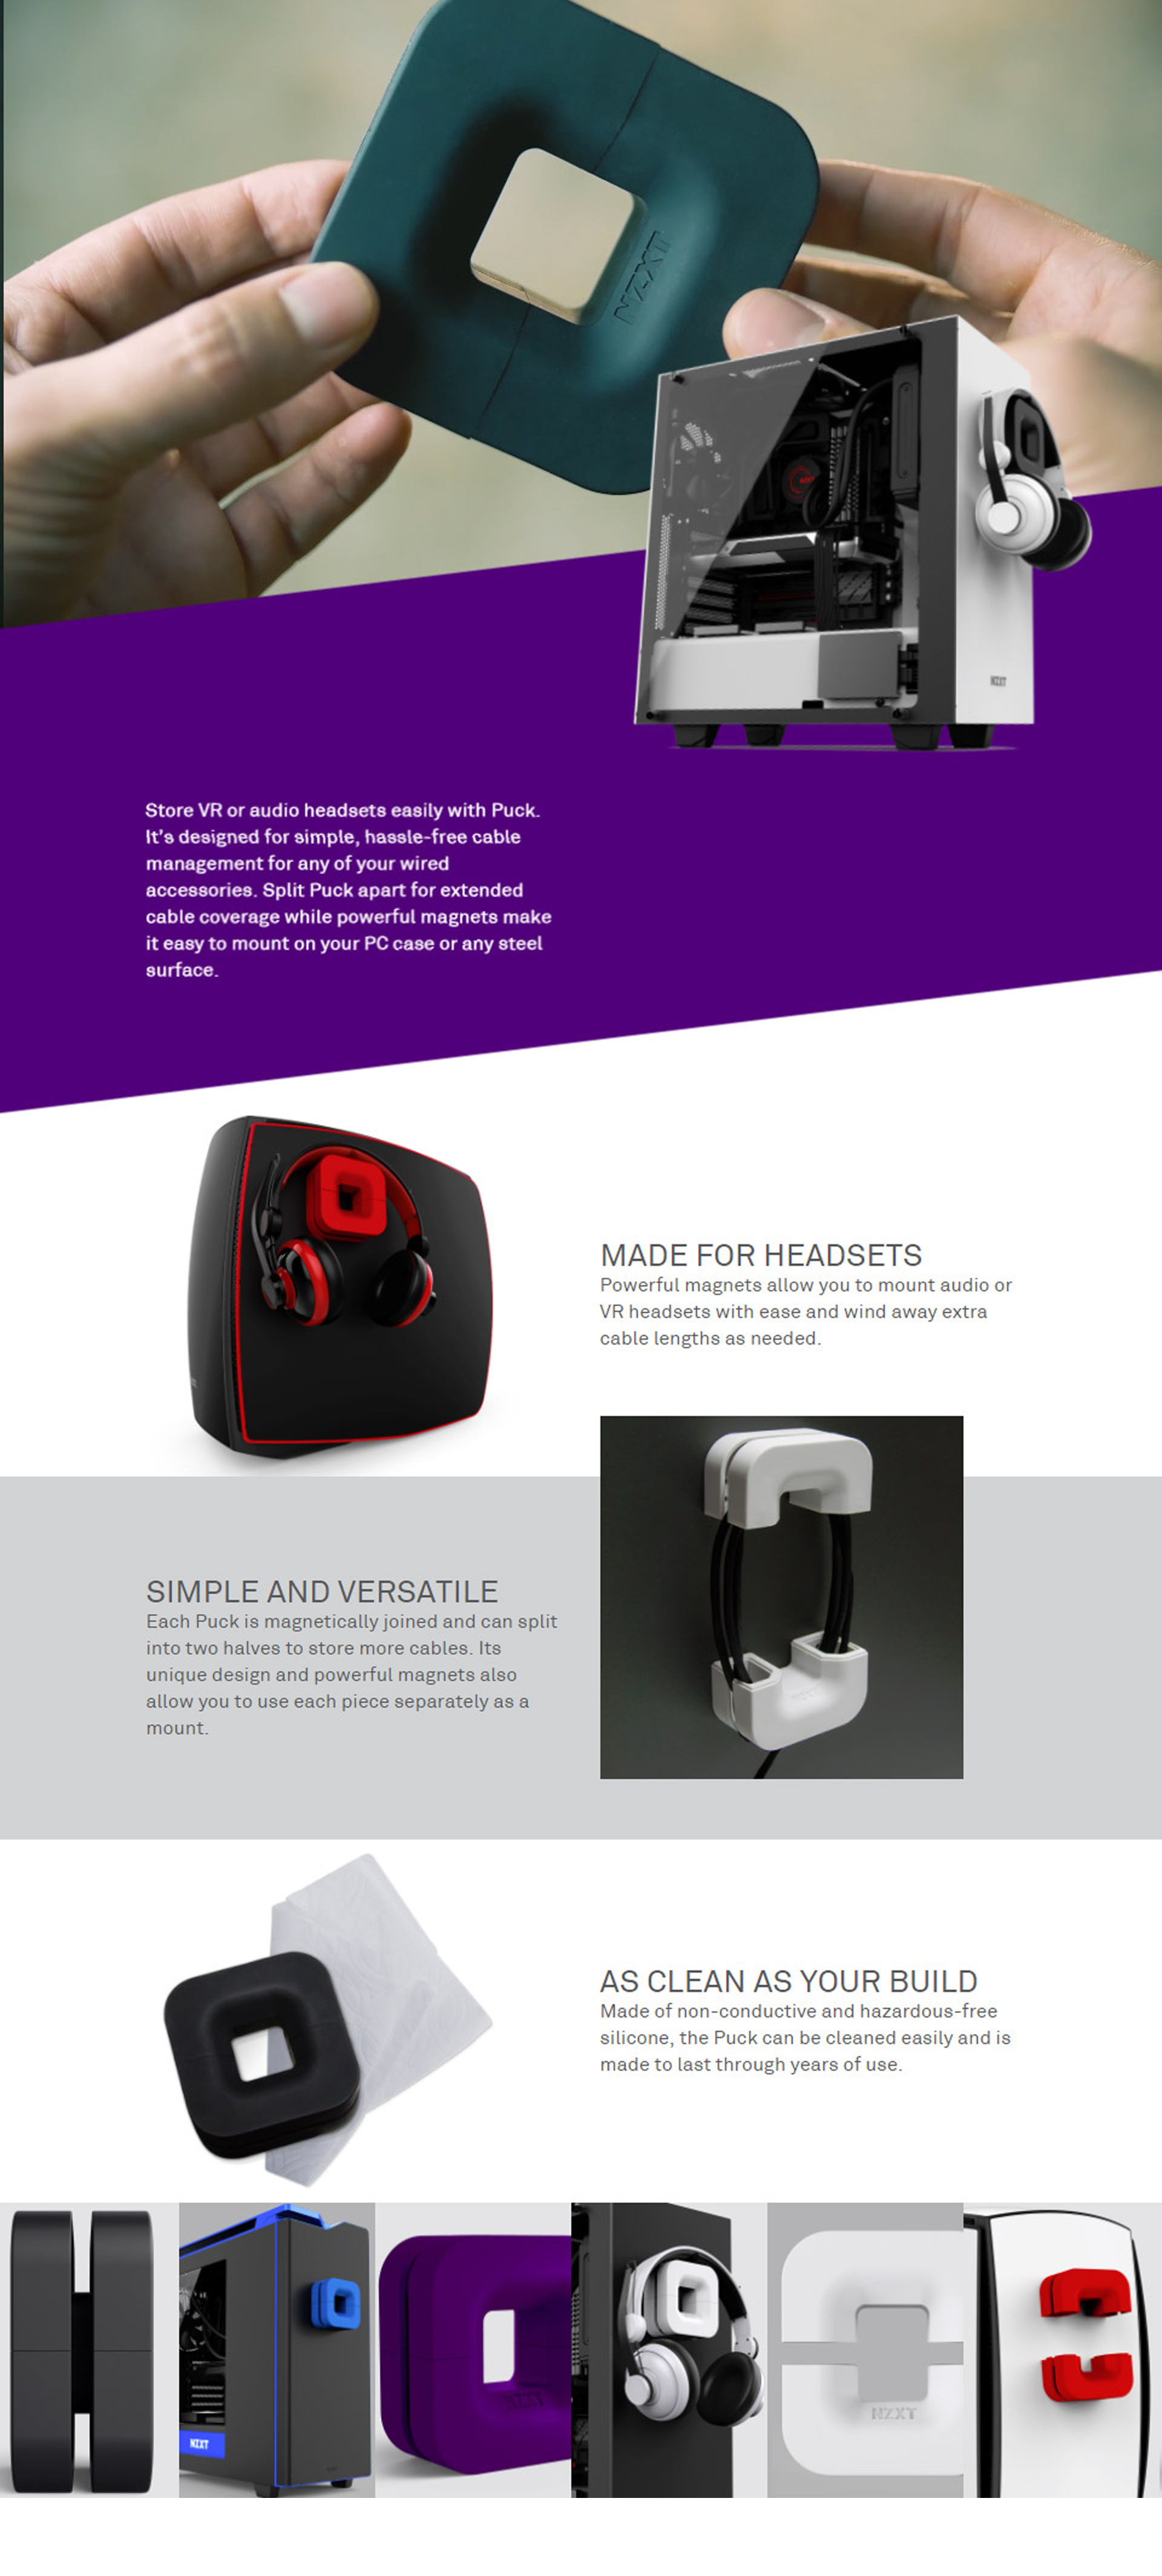 NZXT_Puck_Acessories_Cable_Management_Headset_Mount